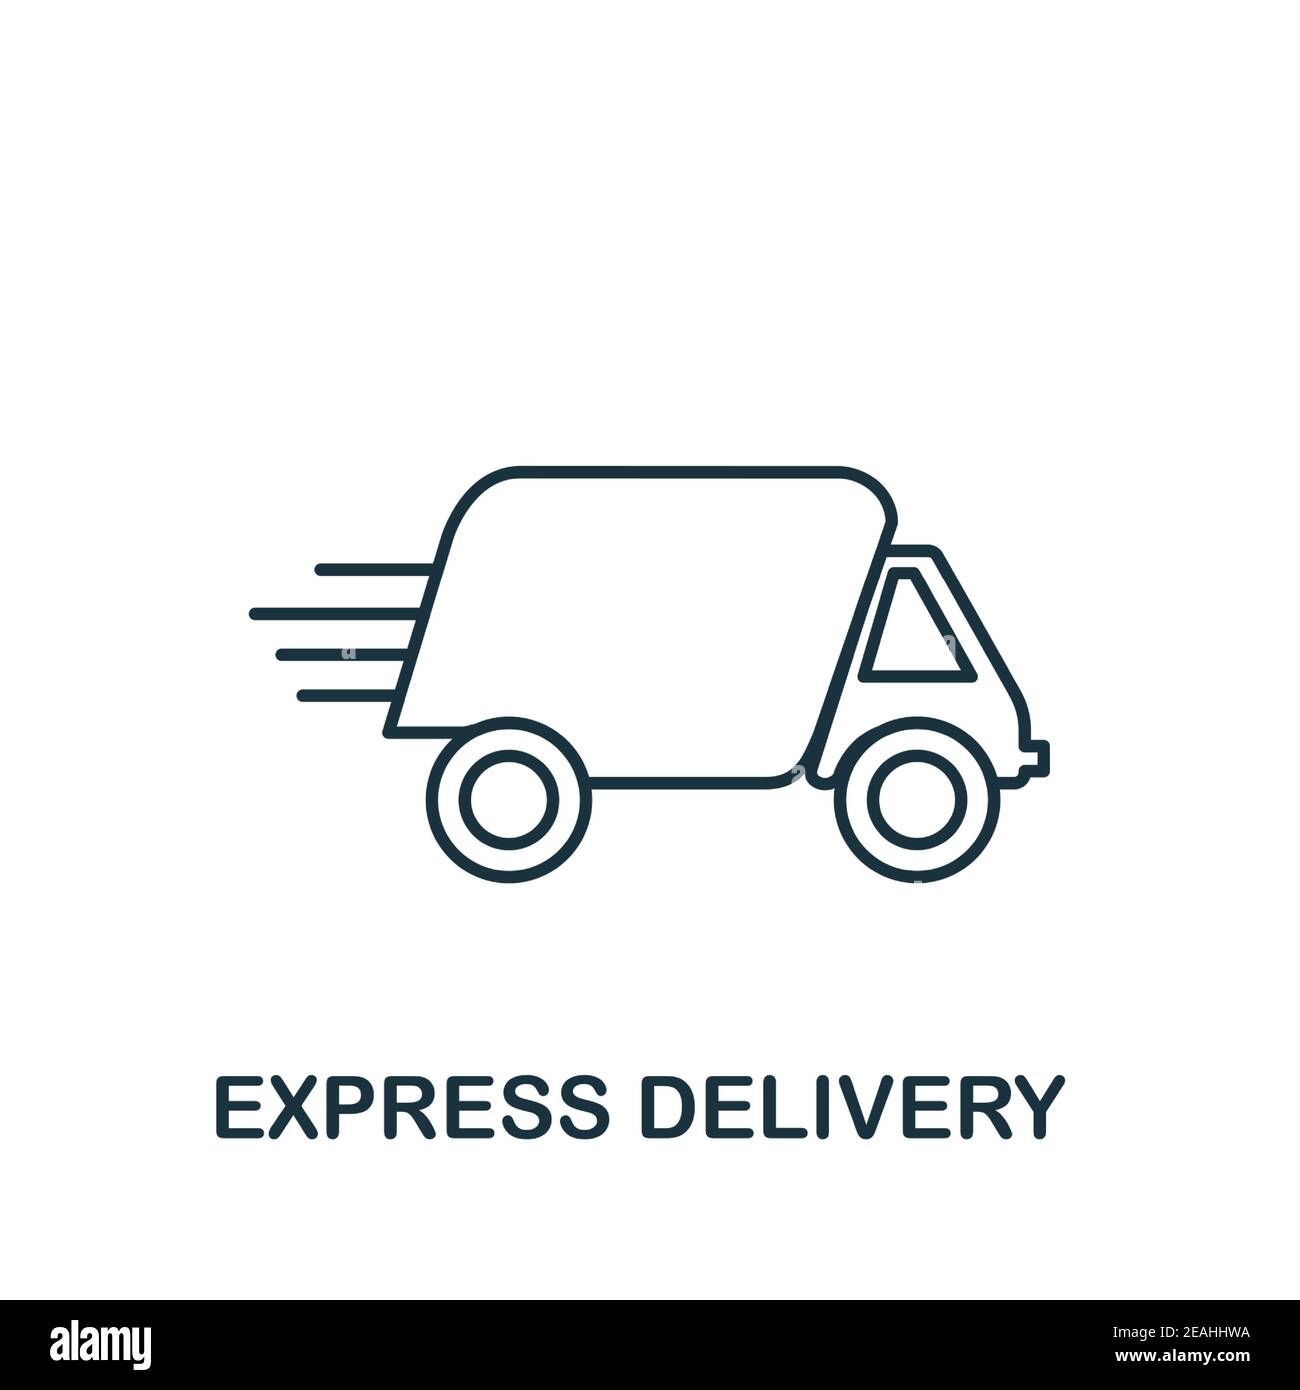 Express Delivery Icon Stock Vector Illustration and Royalty Free